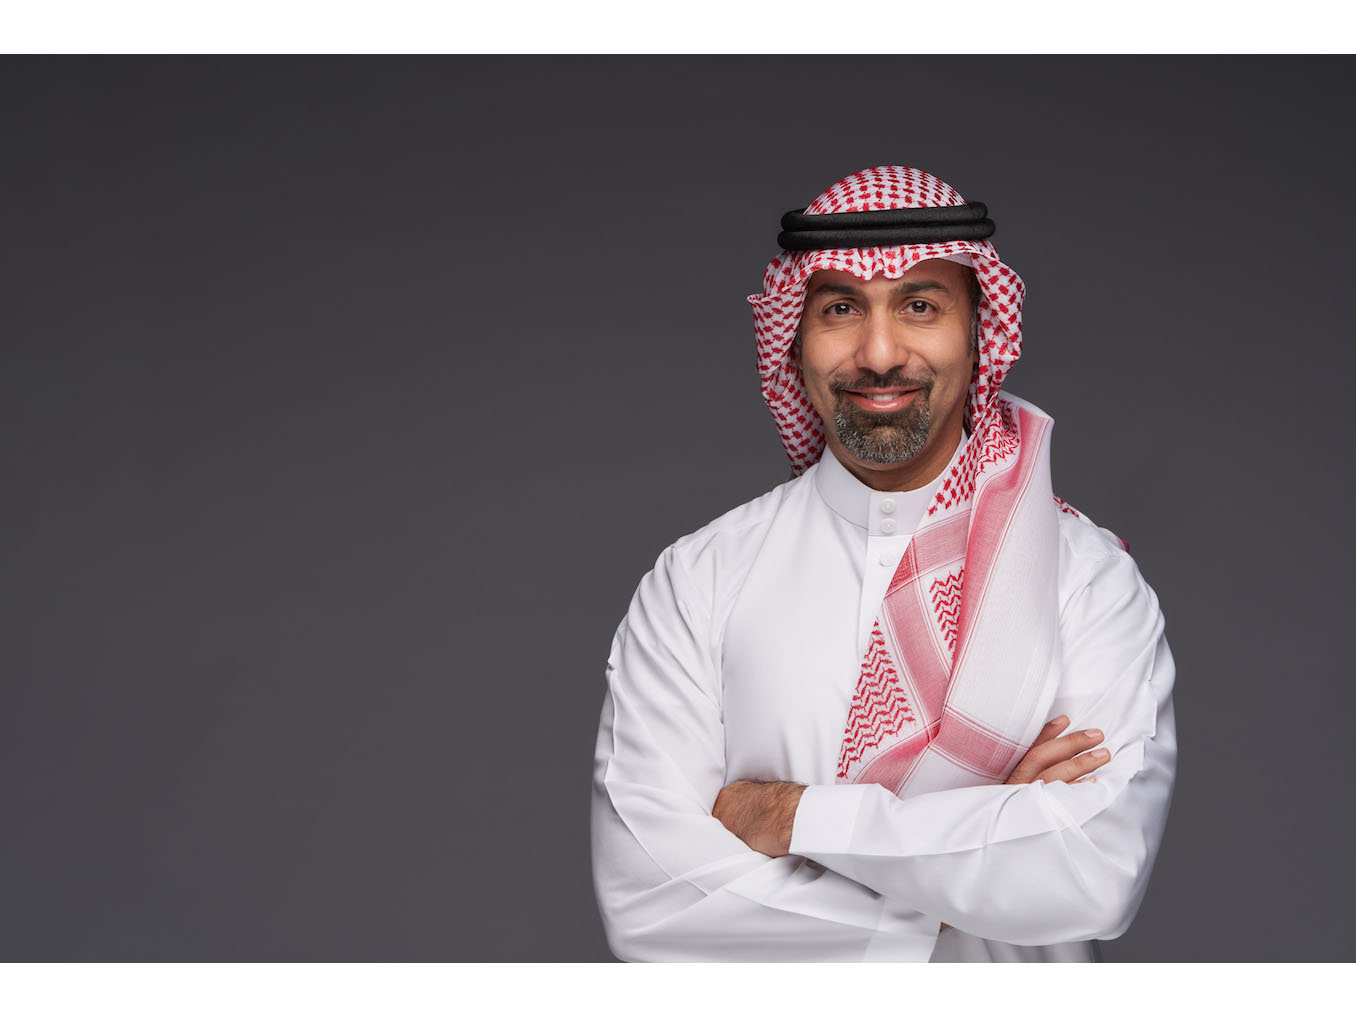 Saudi Signs Media, a driving force of change within the Saudi OOH advertising industry